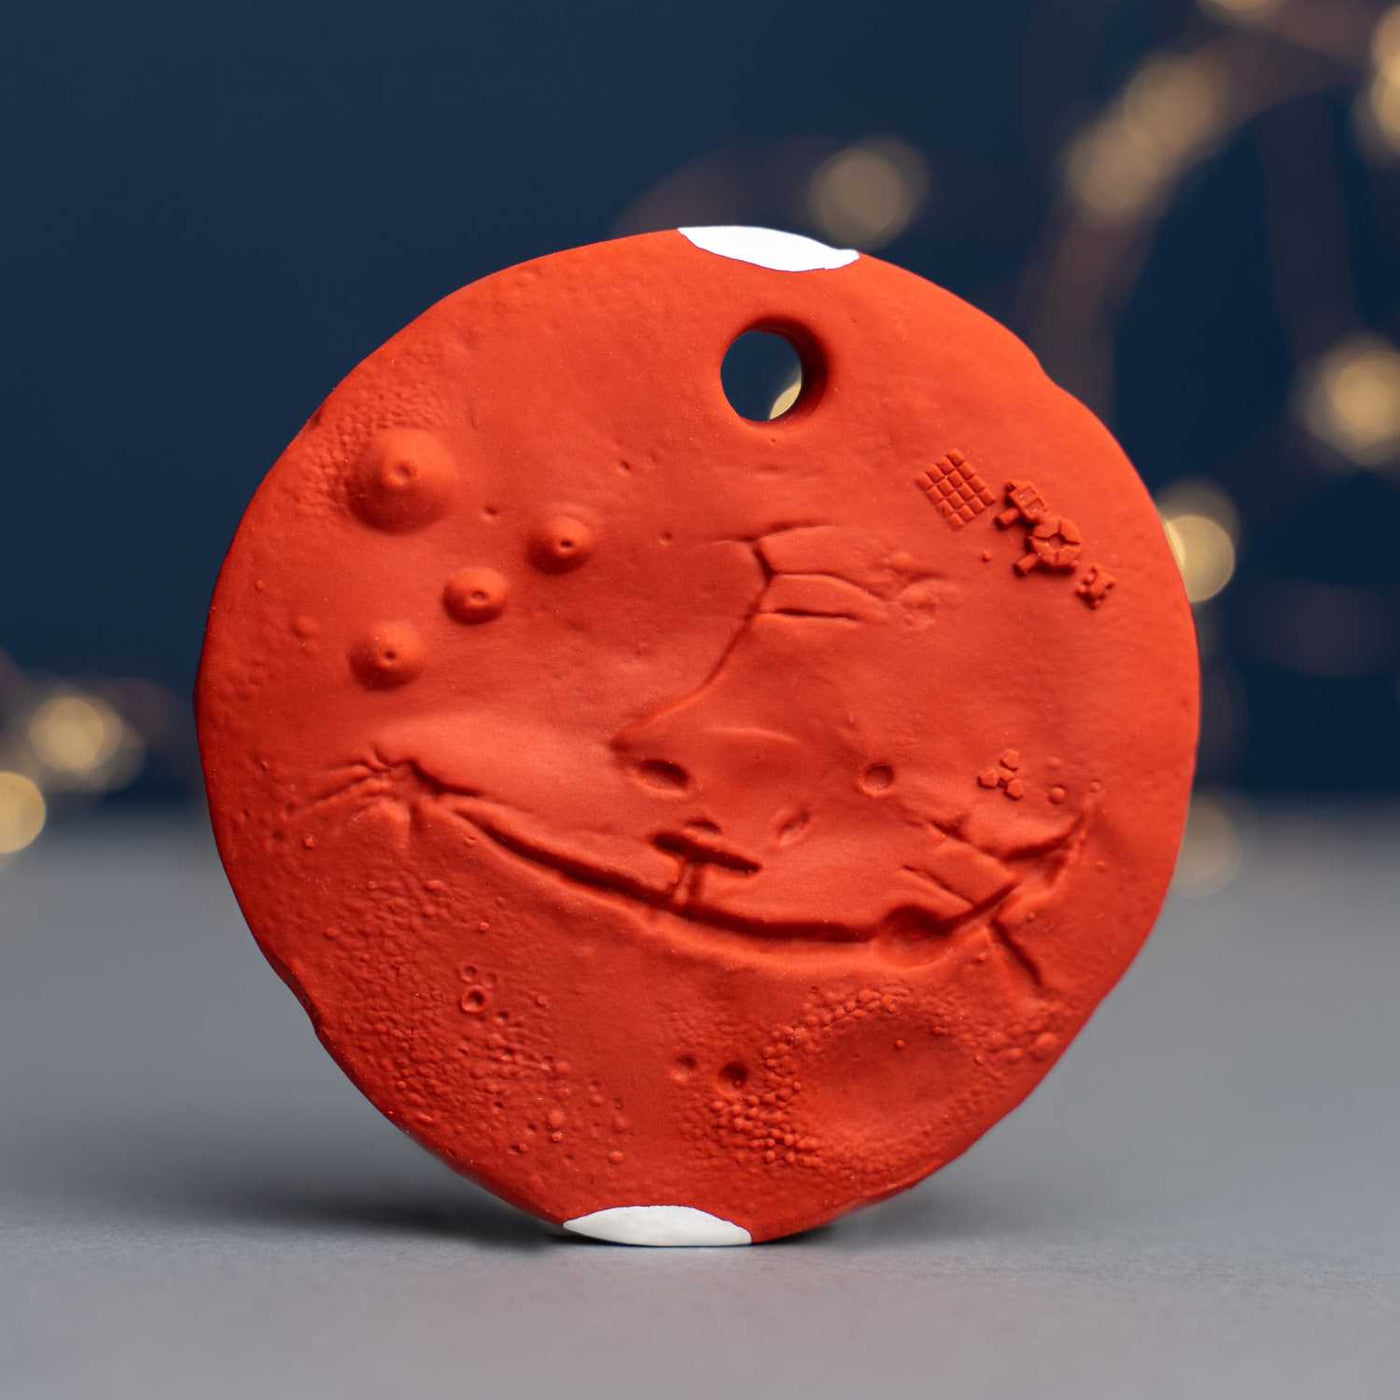 Mars Biscuit is a highly detailed teething toy for a teething baby